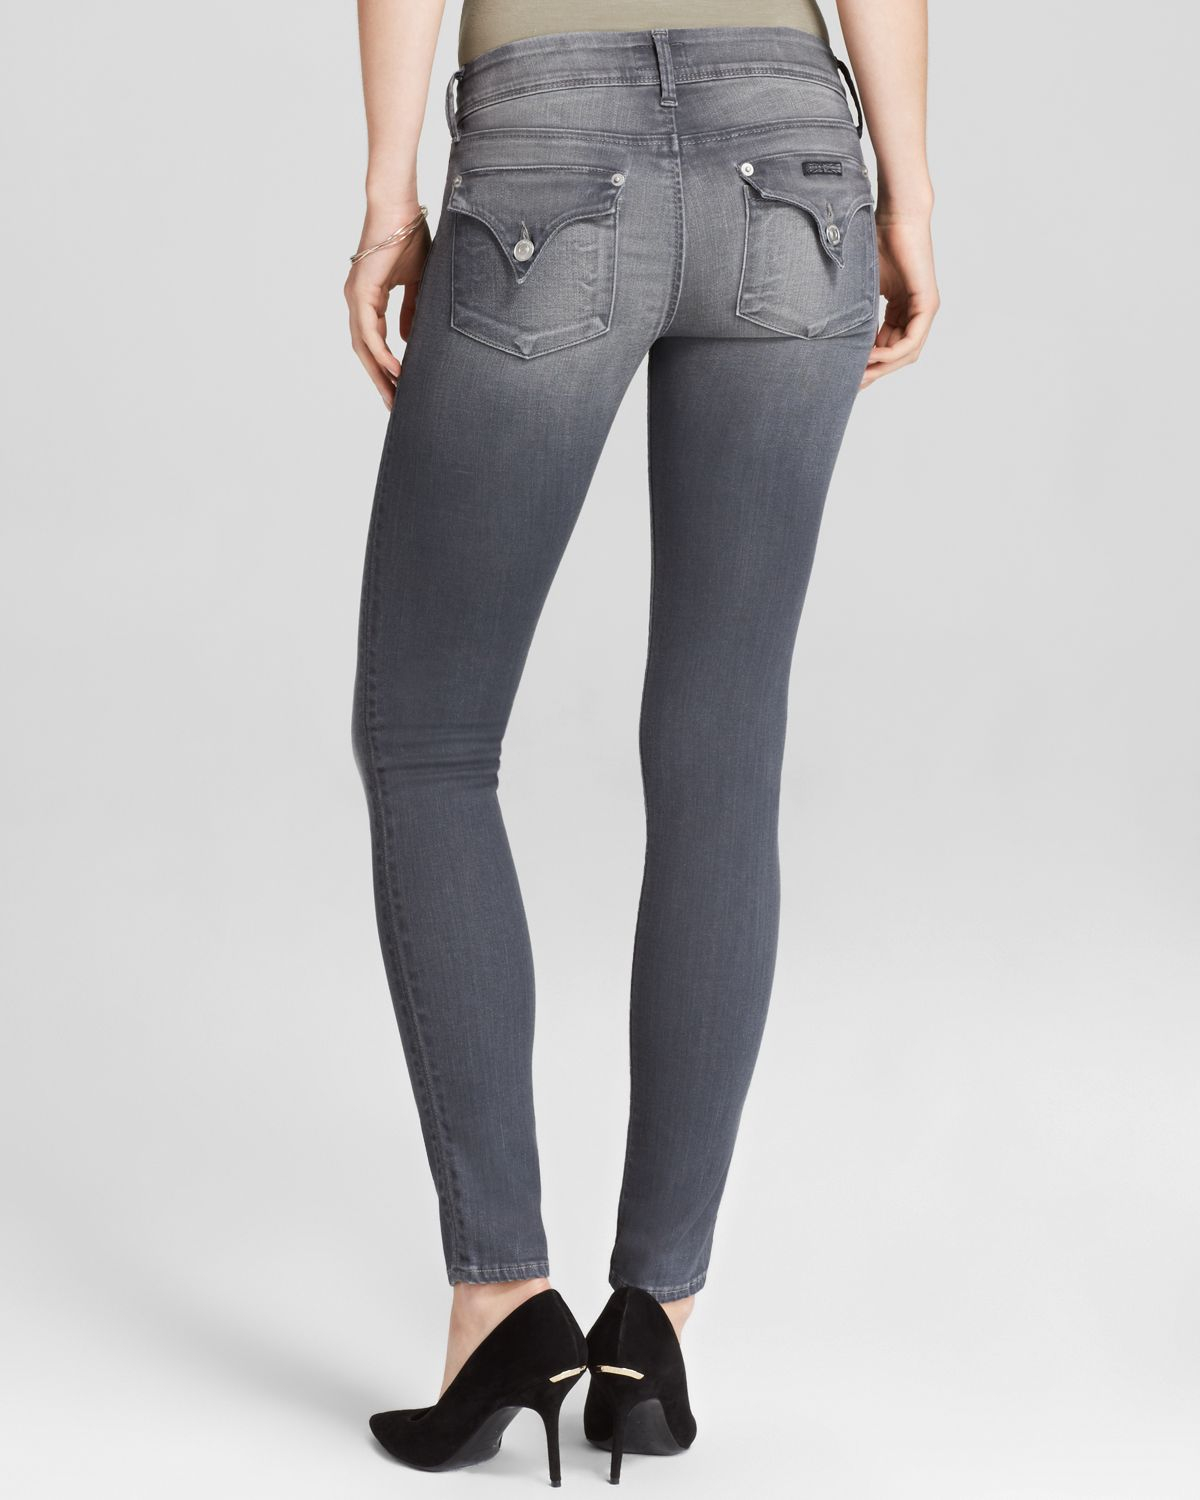 Hudson Jeans Jeans - Collin Skinny With Flap Pockets In Wreckless in ...